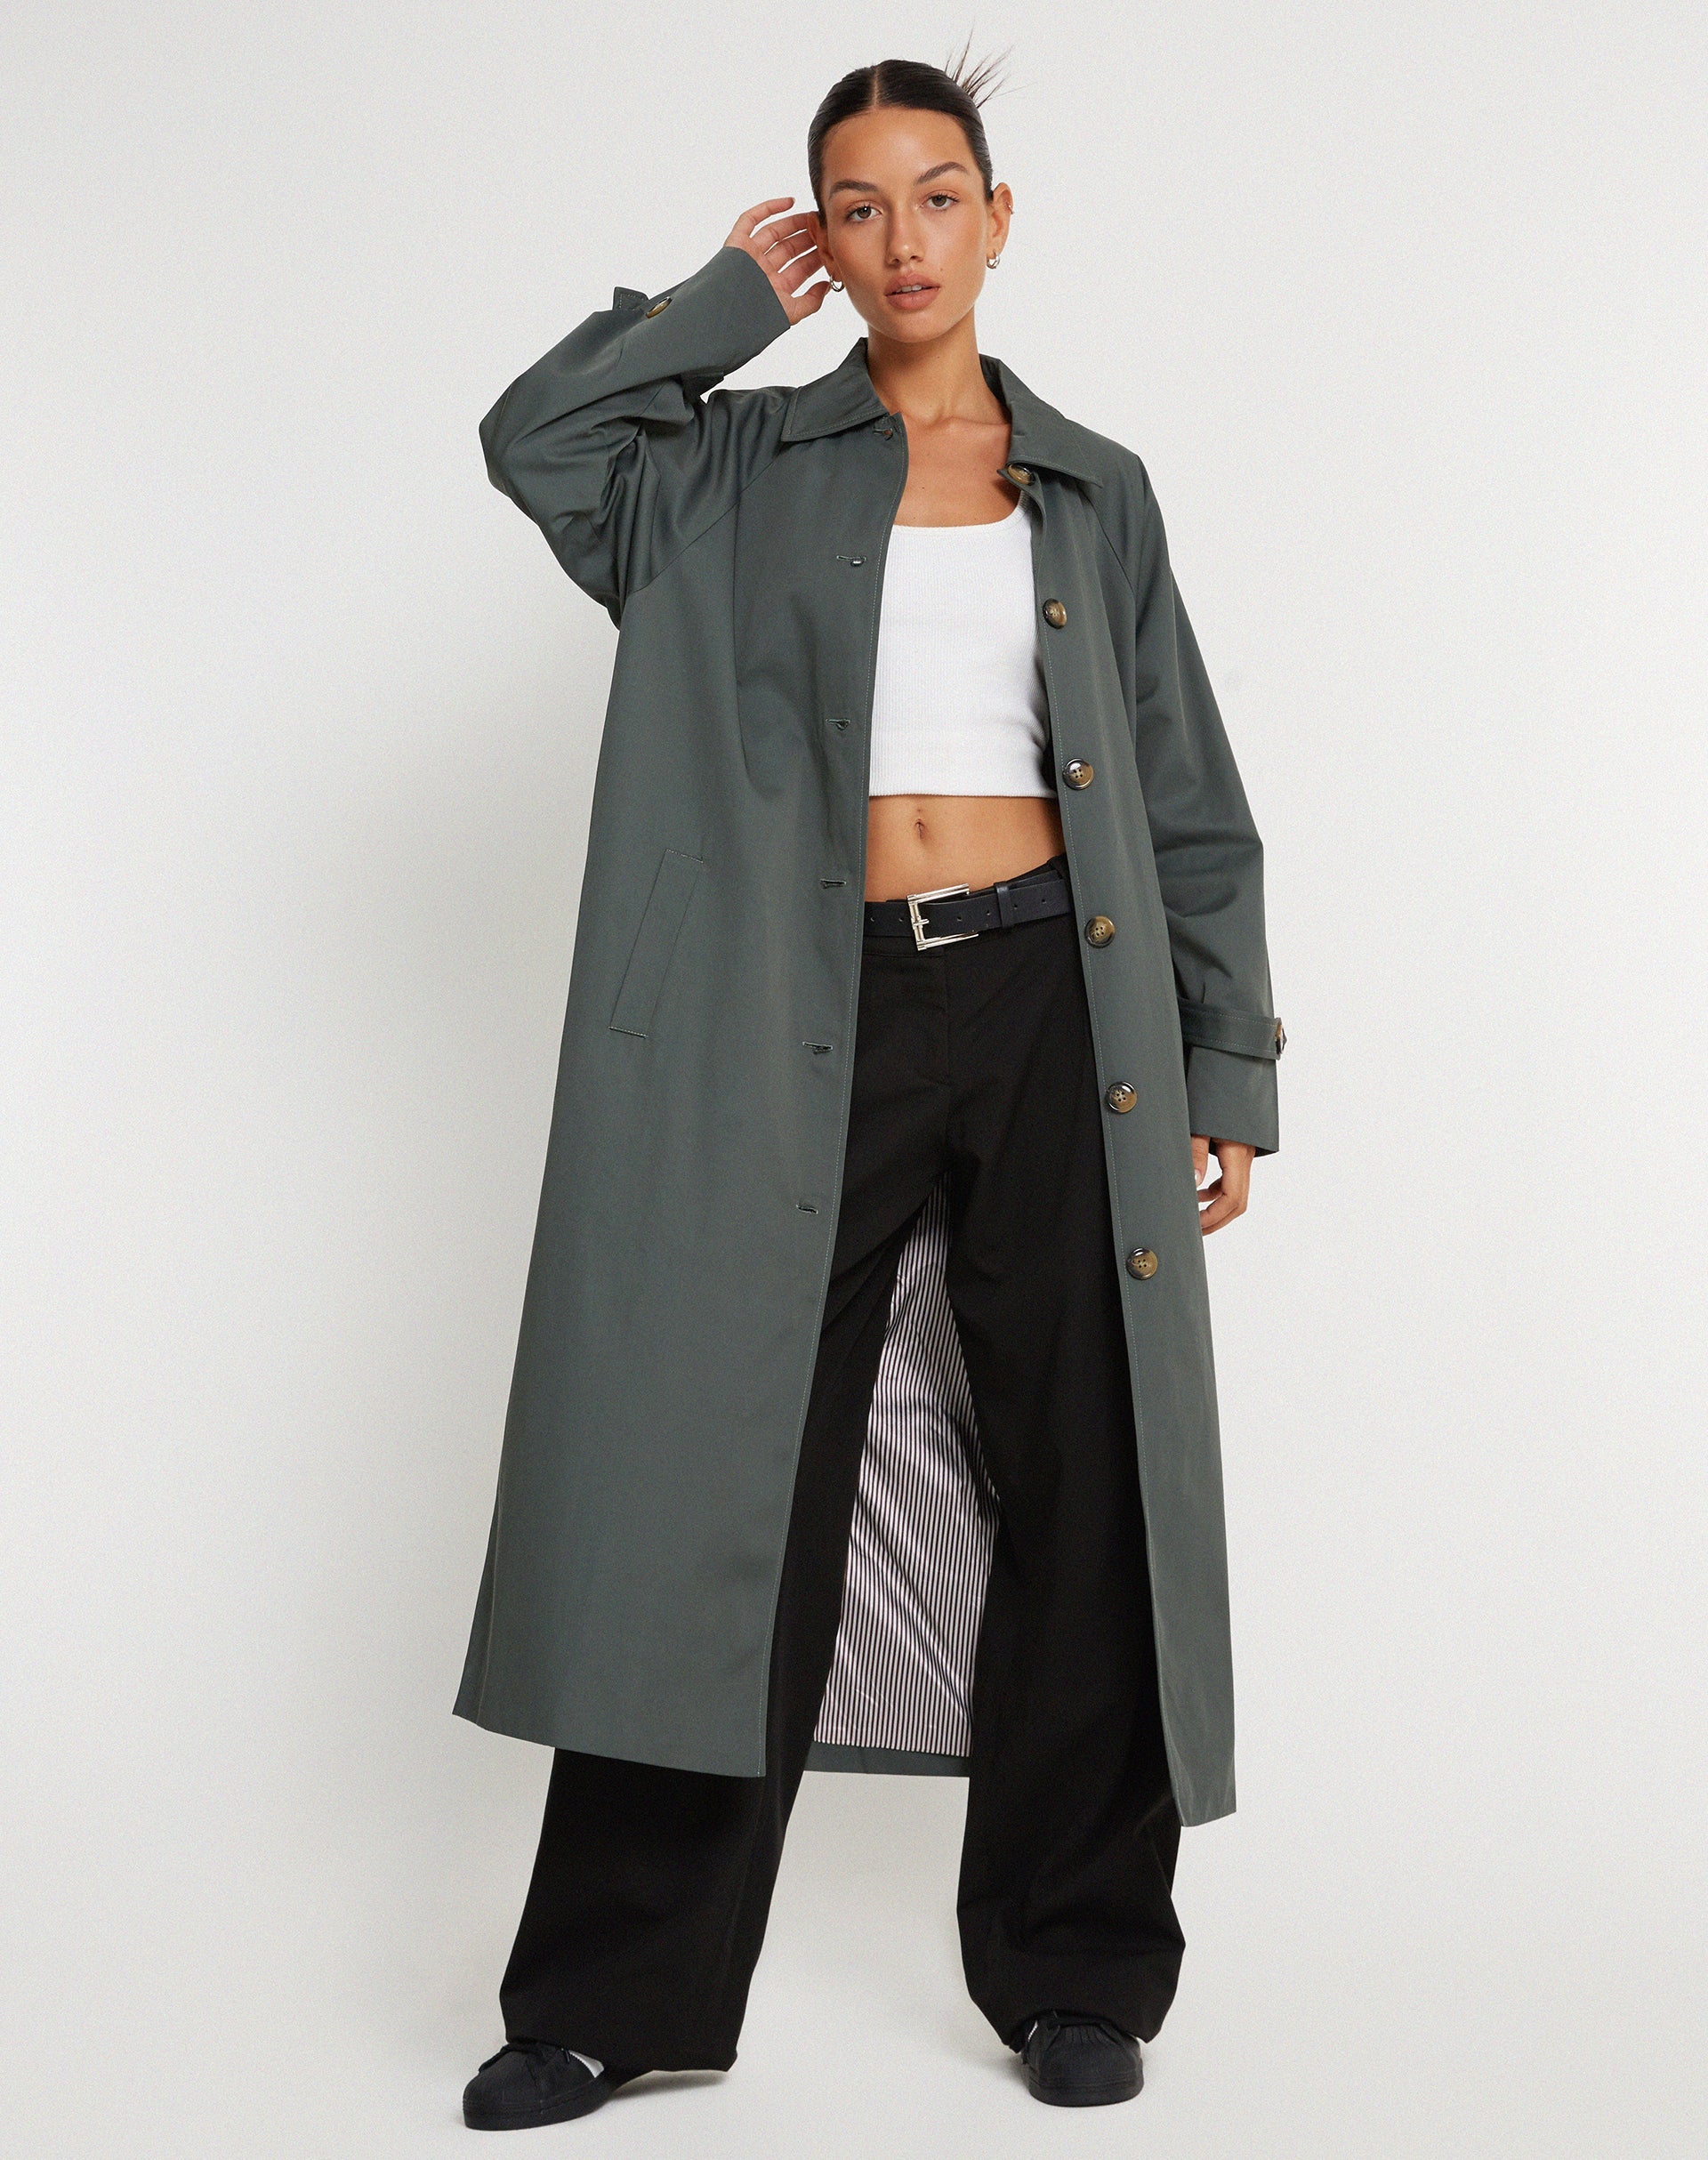 image of Assa Trench Coat in Light Charcoal with Stripe Lining